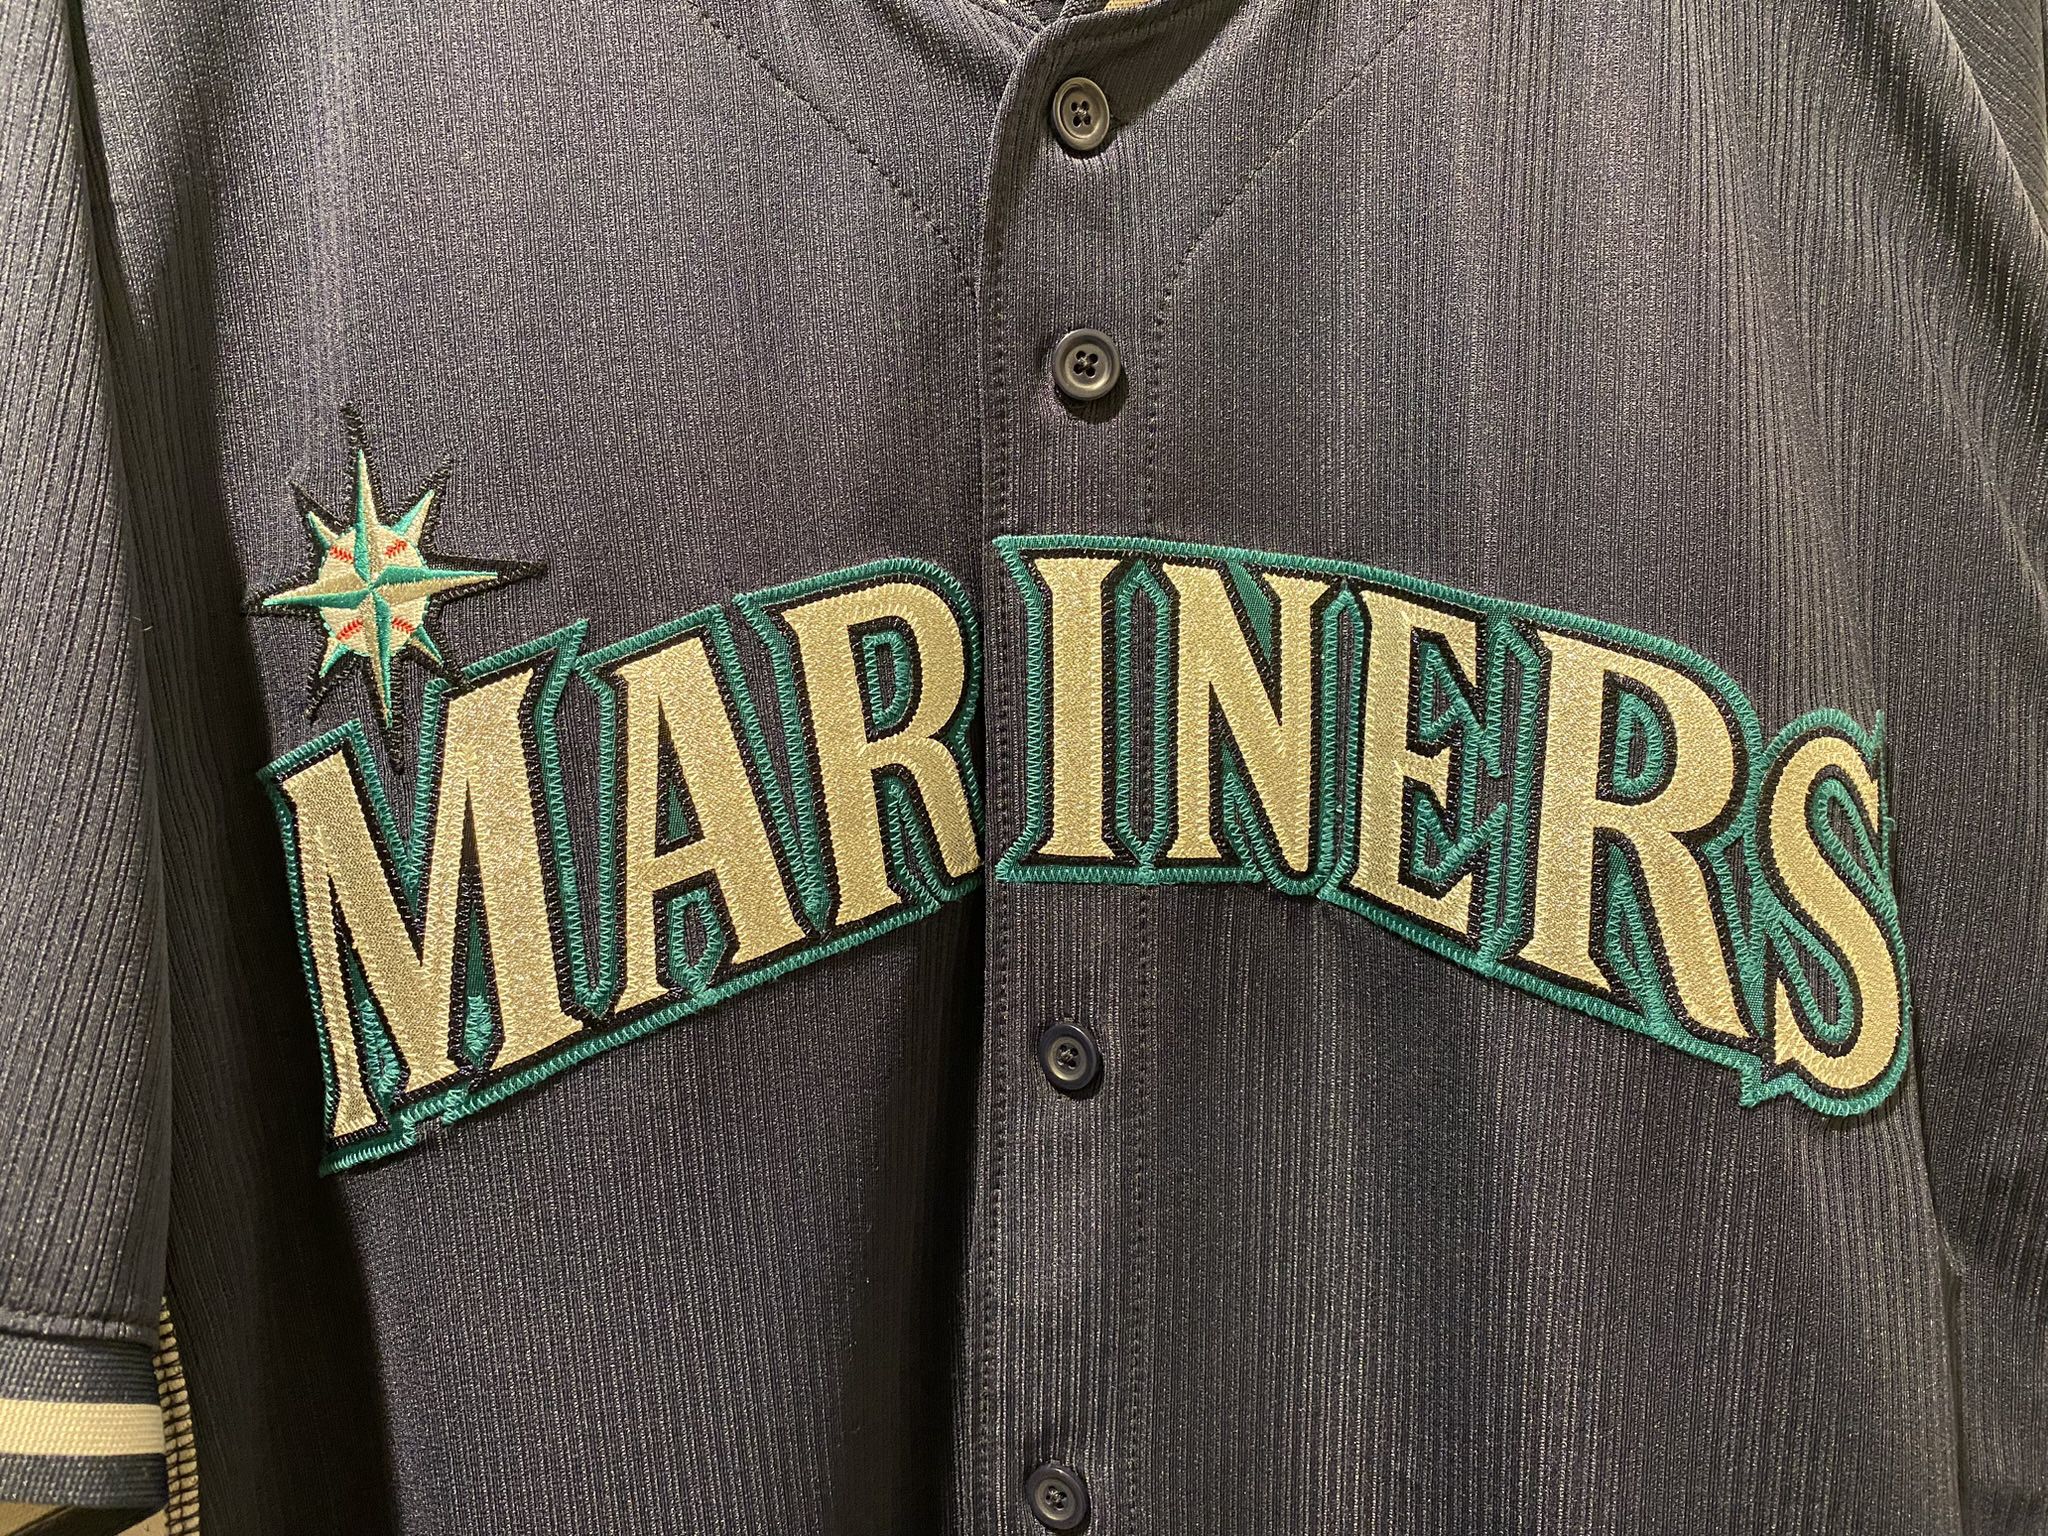 Authentic Seattle Mariners Player Spring Training Jersey Size 48 for Sale  in Bothell, WA - OfferUp